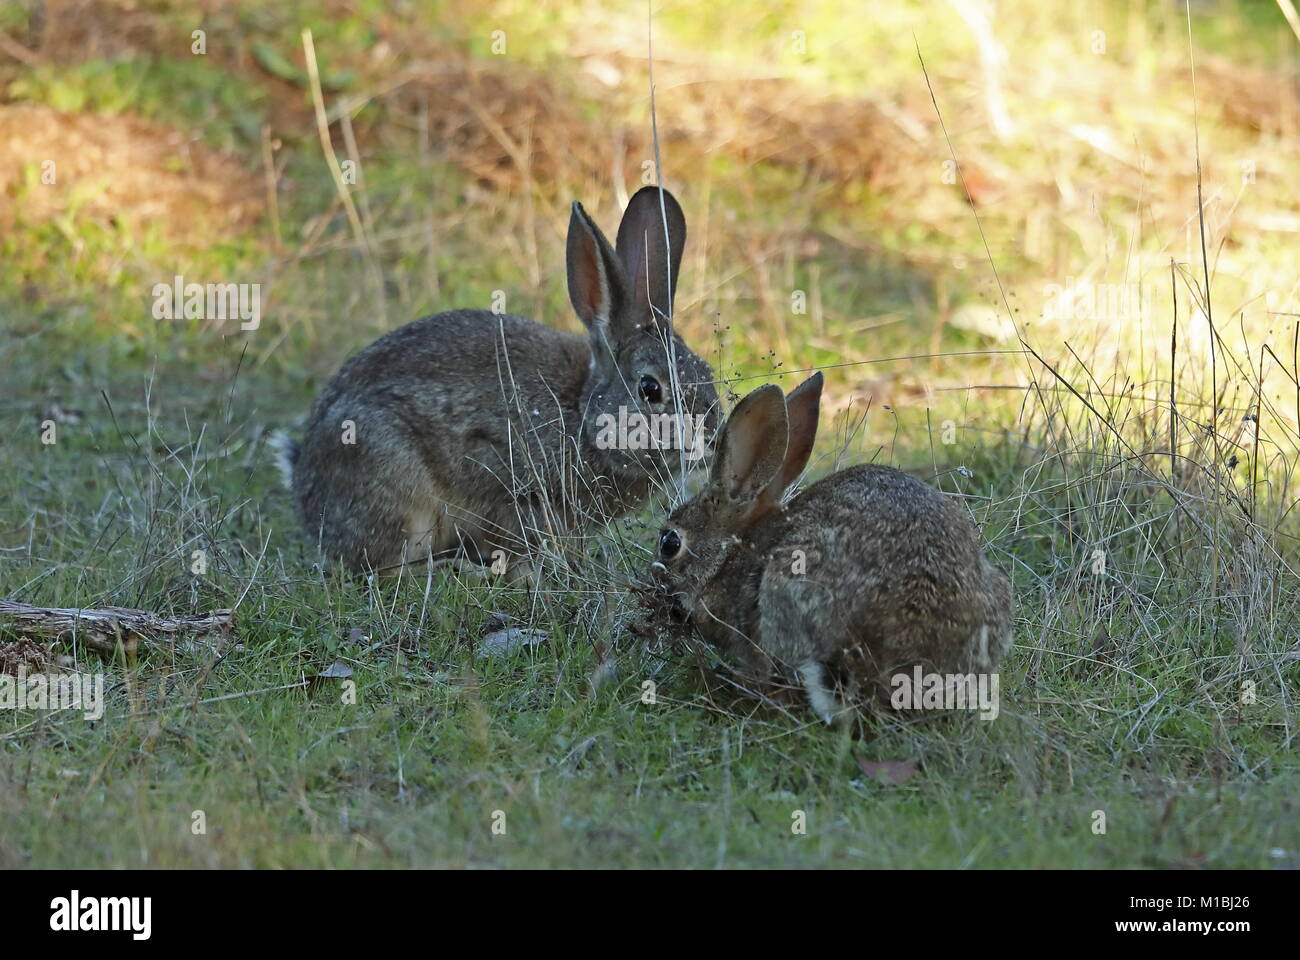 European Rabbit (Oryctolagus cuniculus algirus) female collecting bedding for nest, with male close by  Parque Natural Sierra de Andujar, Jean, Spain  Stock Photo